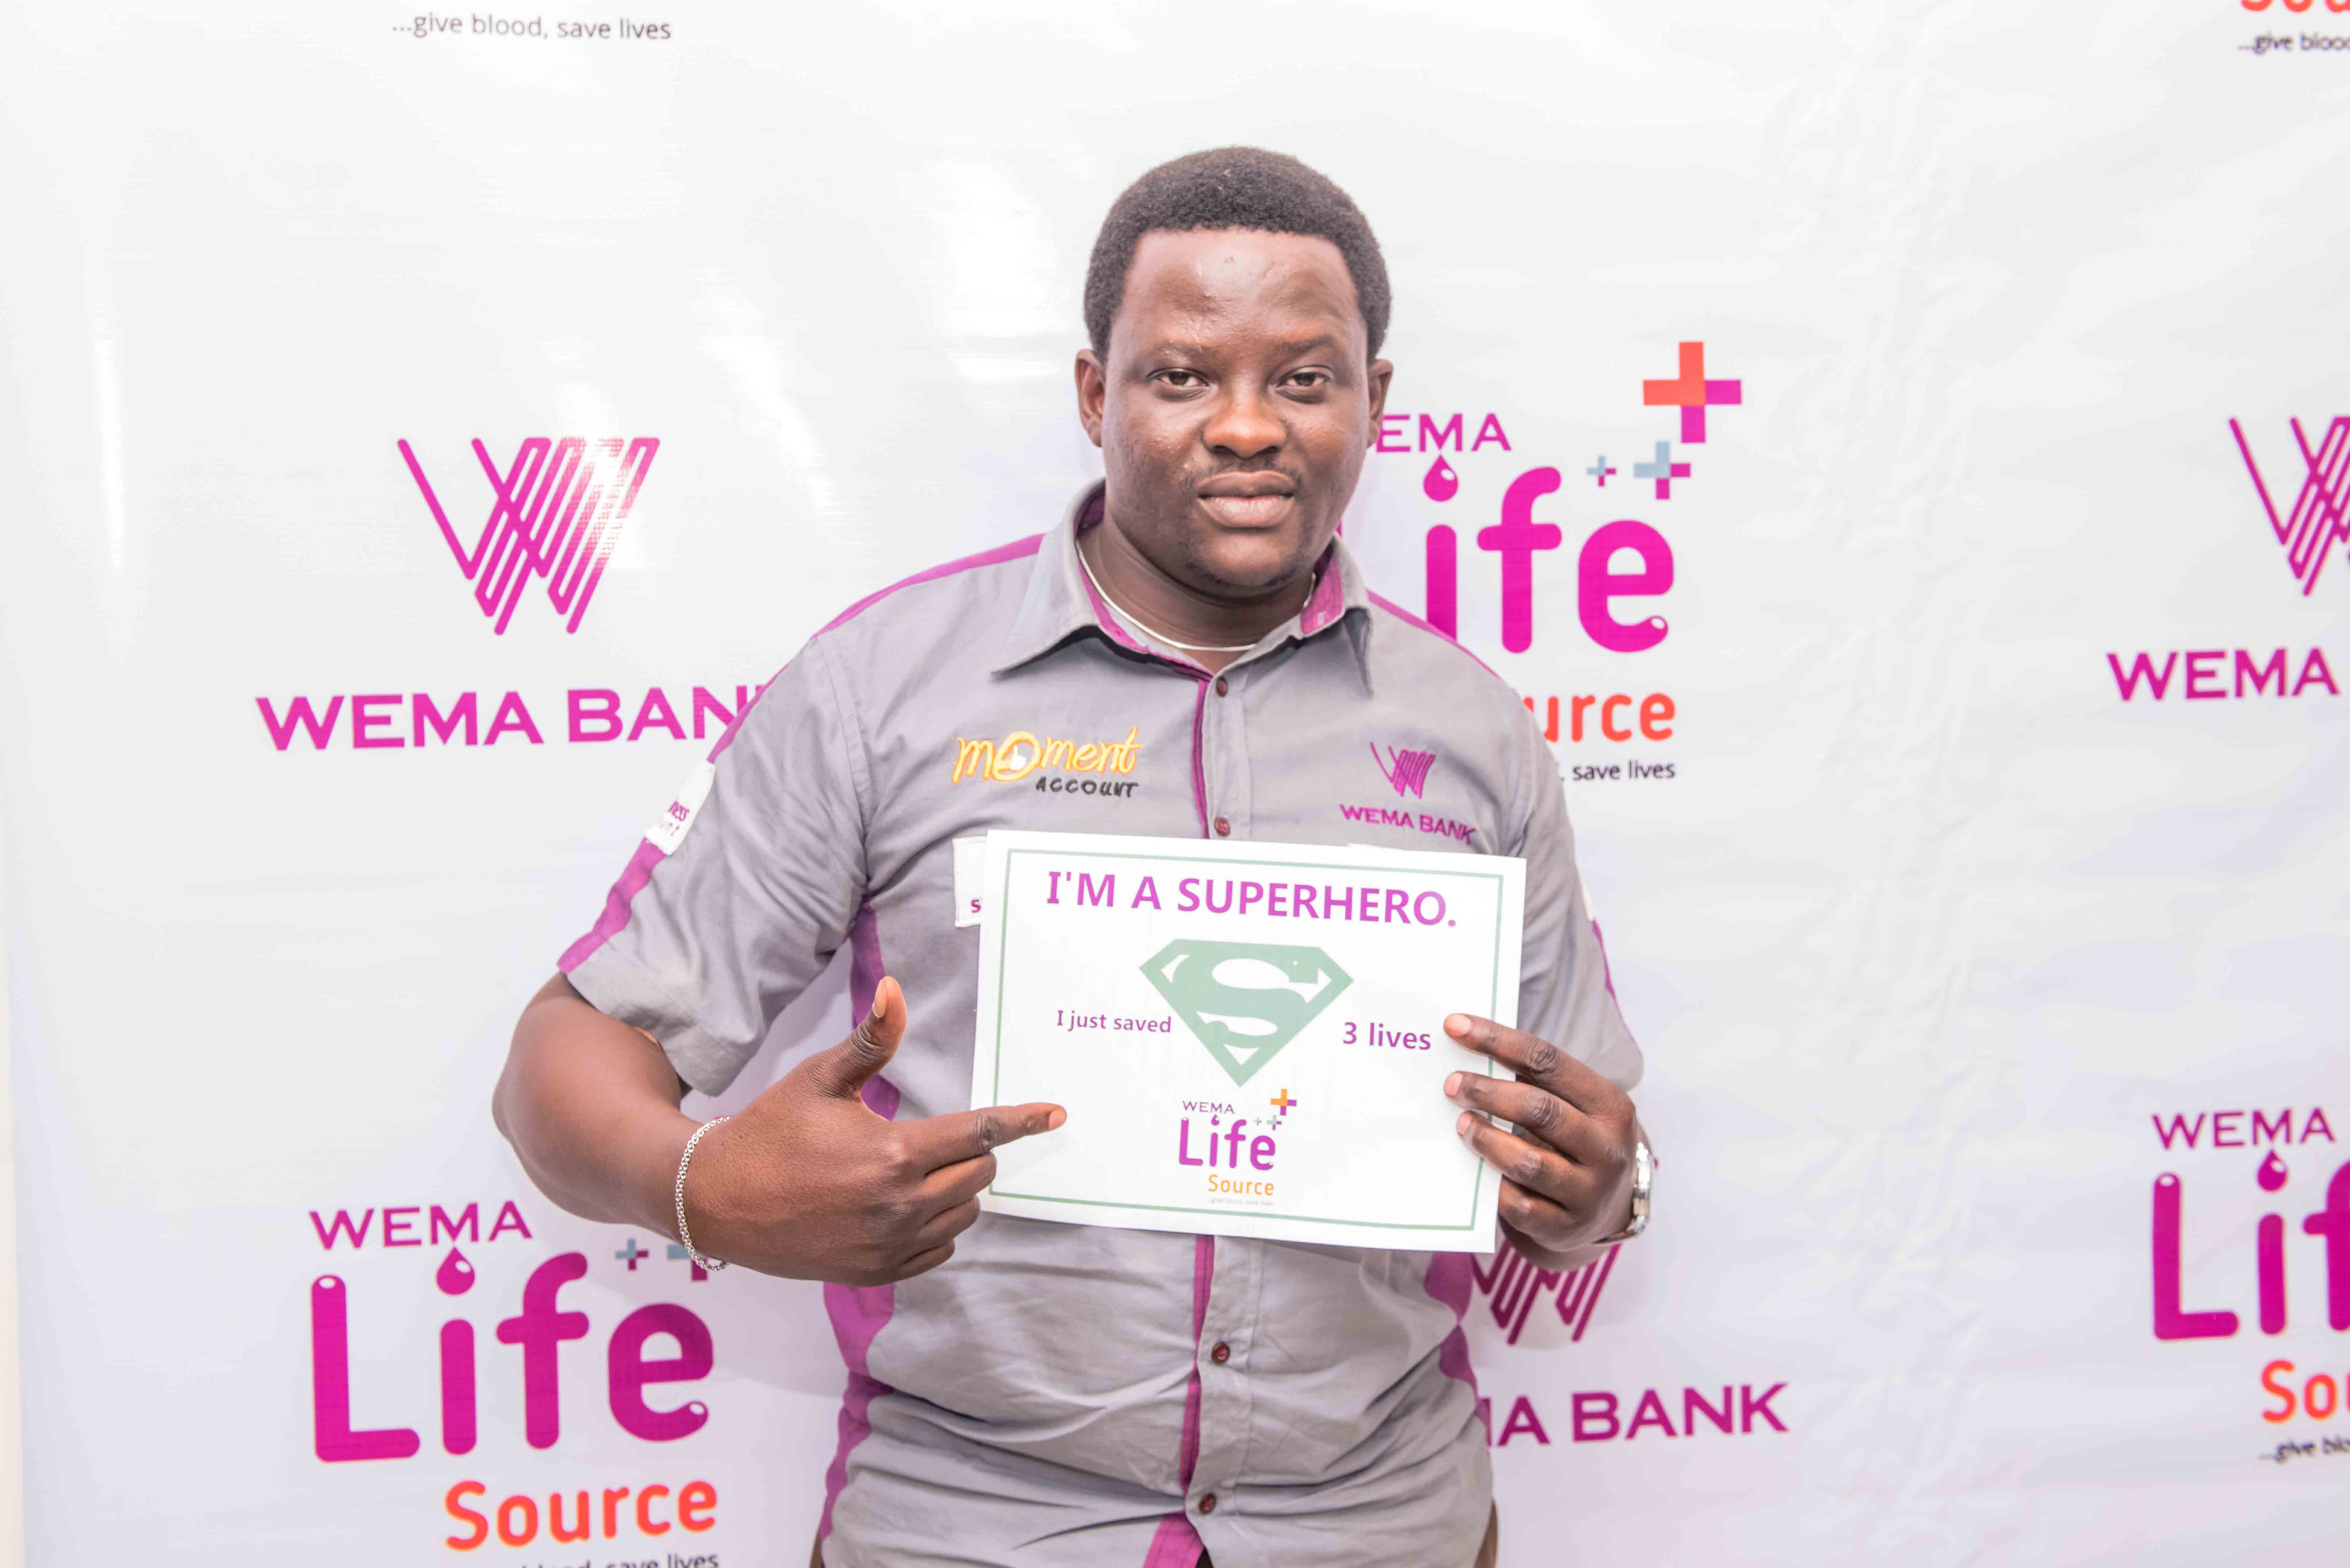 Wema Bank Employees Donate Blood to Save Lives